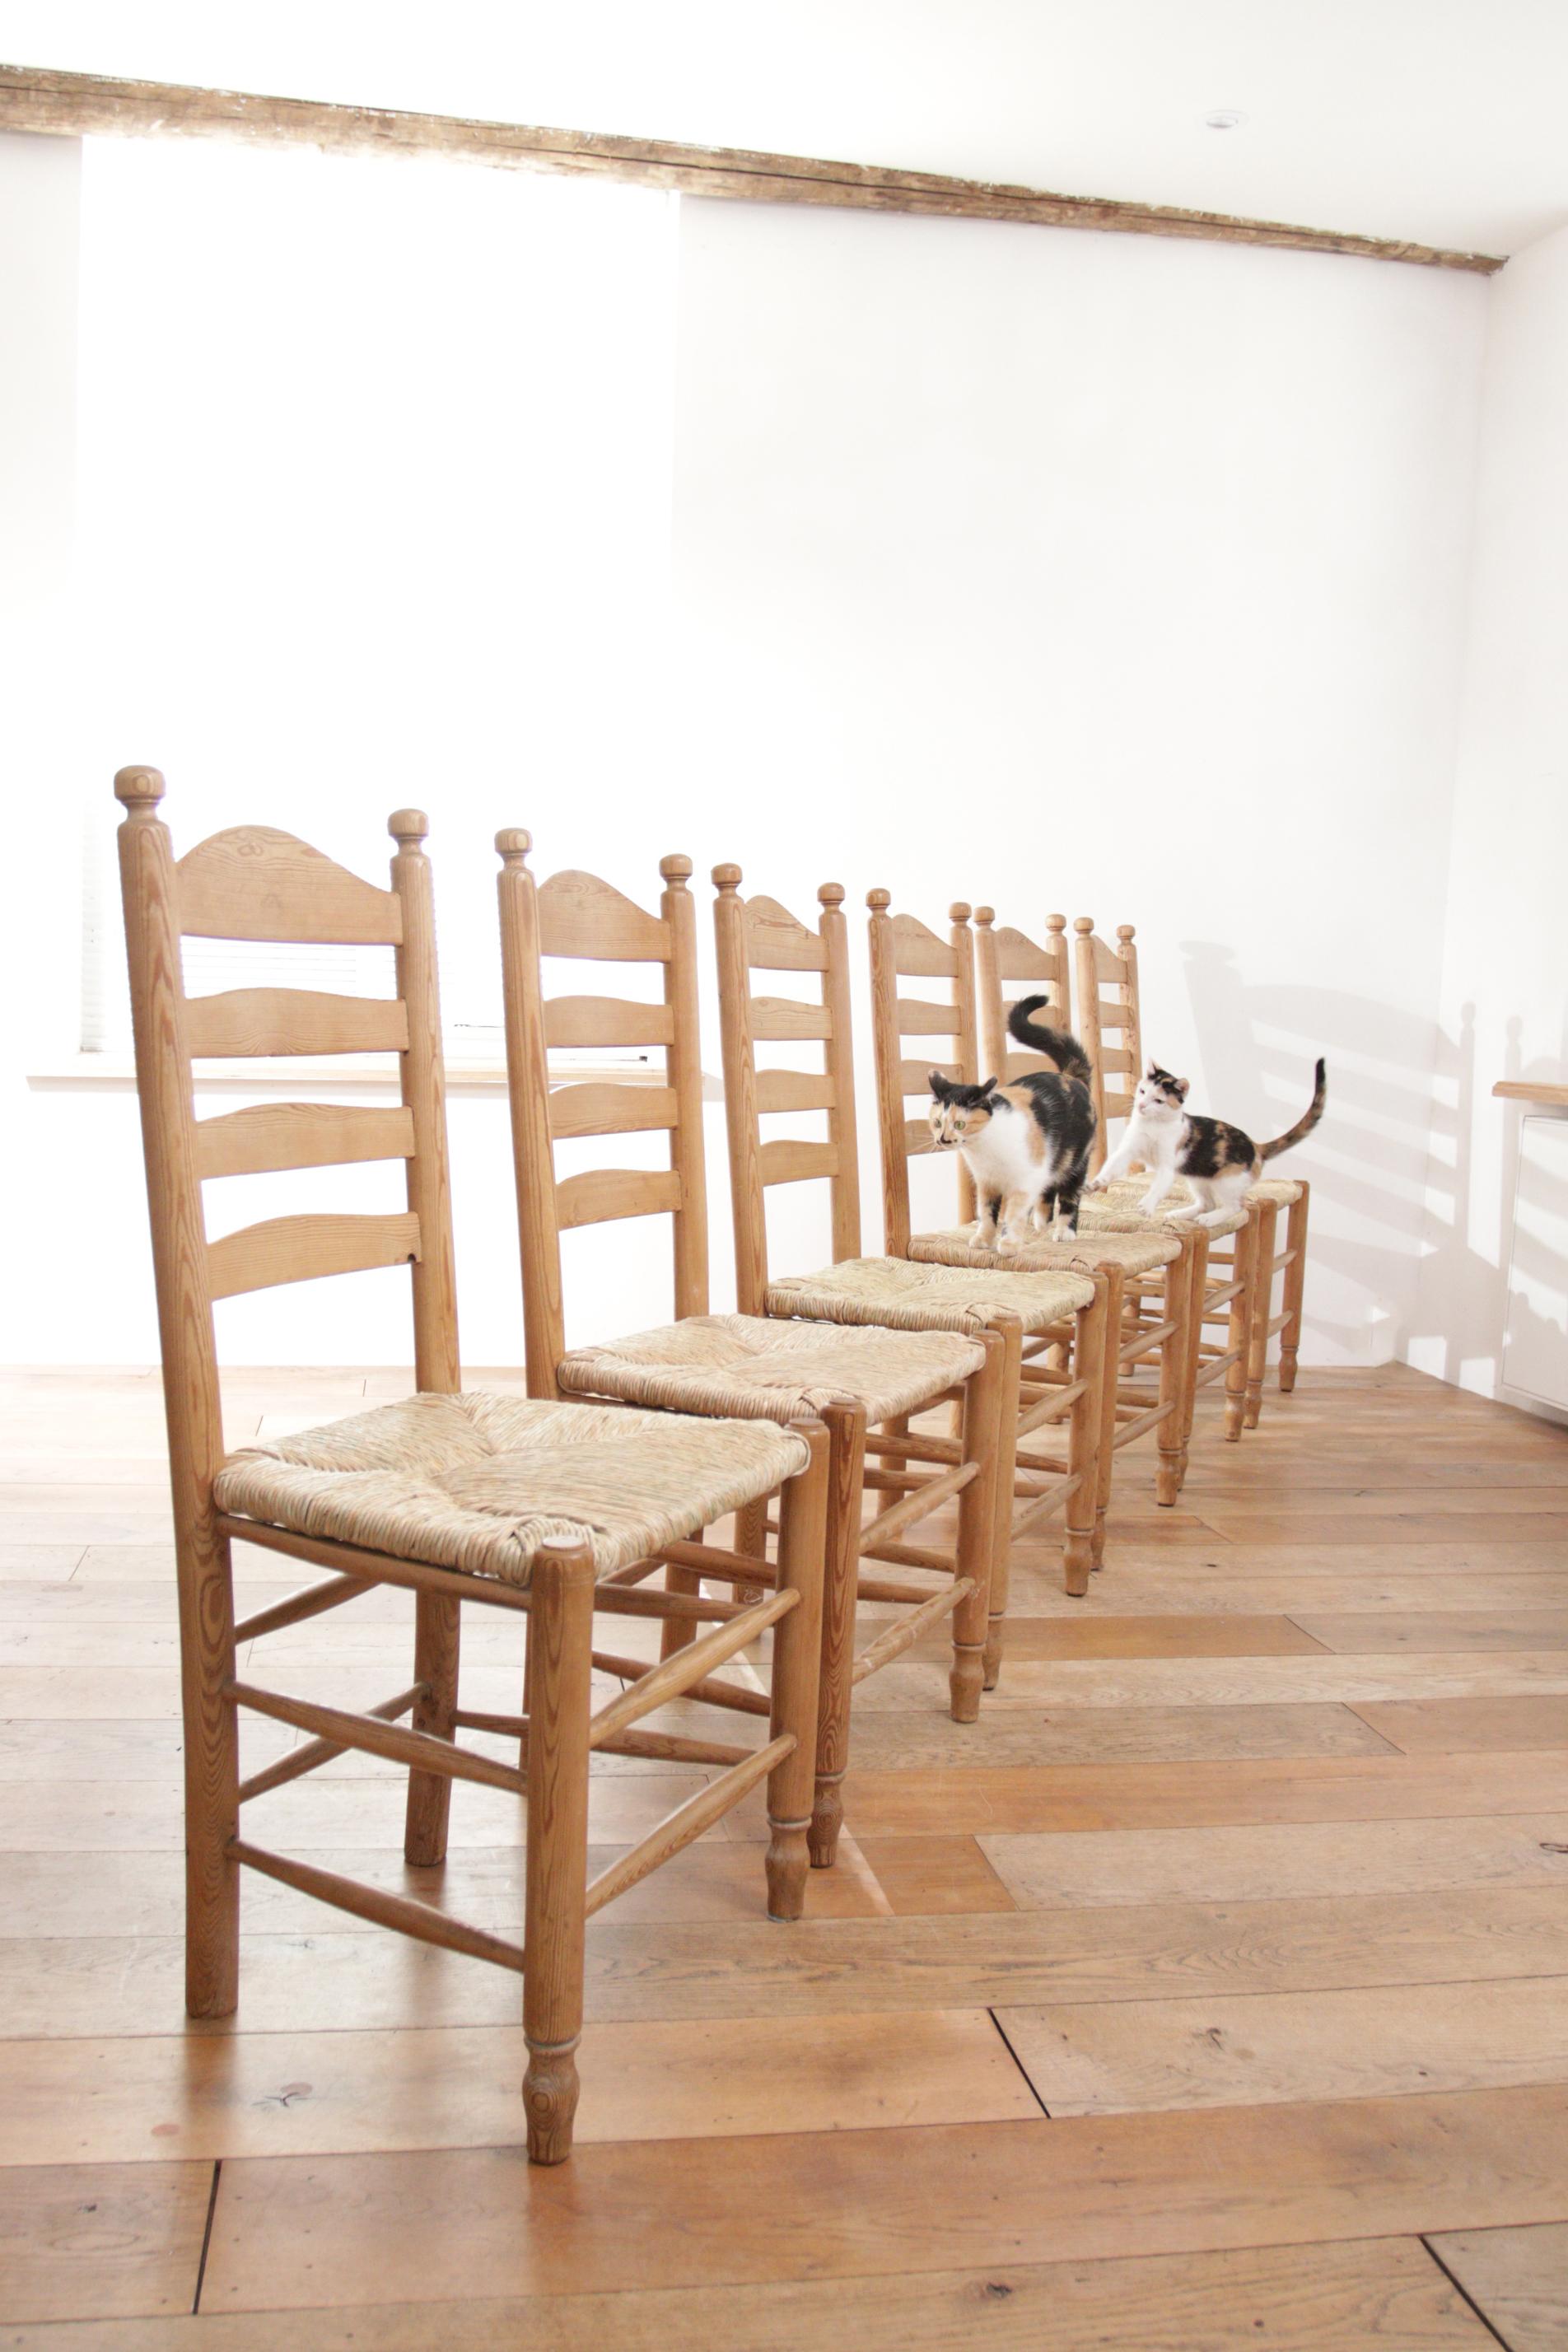 6 Beautiful ladderback chairs from the 60s made of pine with new wicker woven seats.
Fit perfectly with the style of designers such as Charlotte Perriand and Charles Dudouyt.
They are comfortable and have a very nice warm appearance due to the use